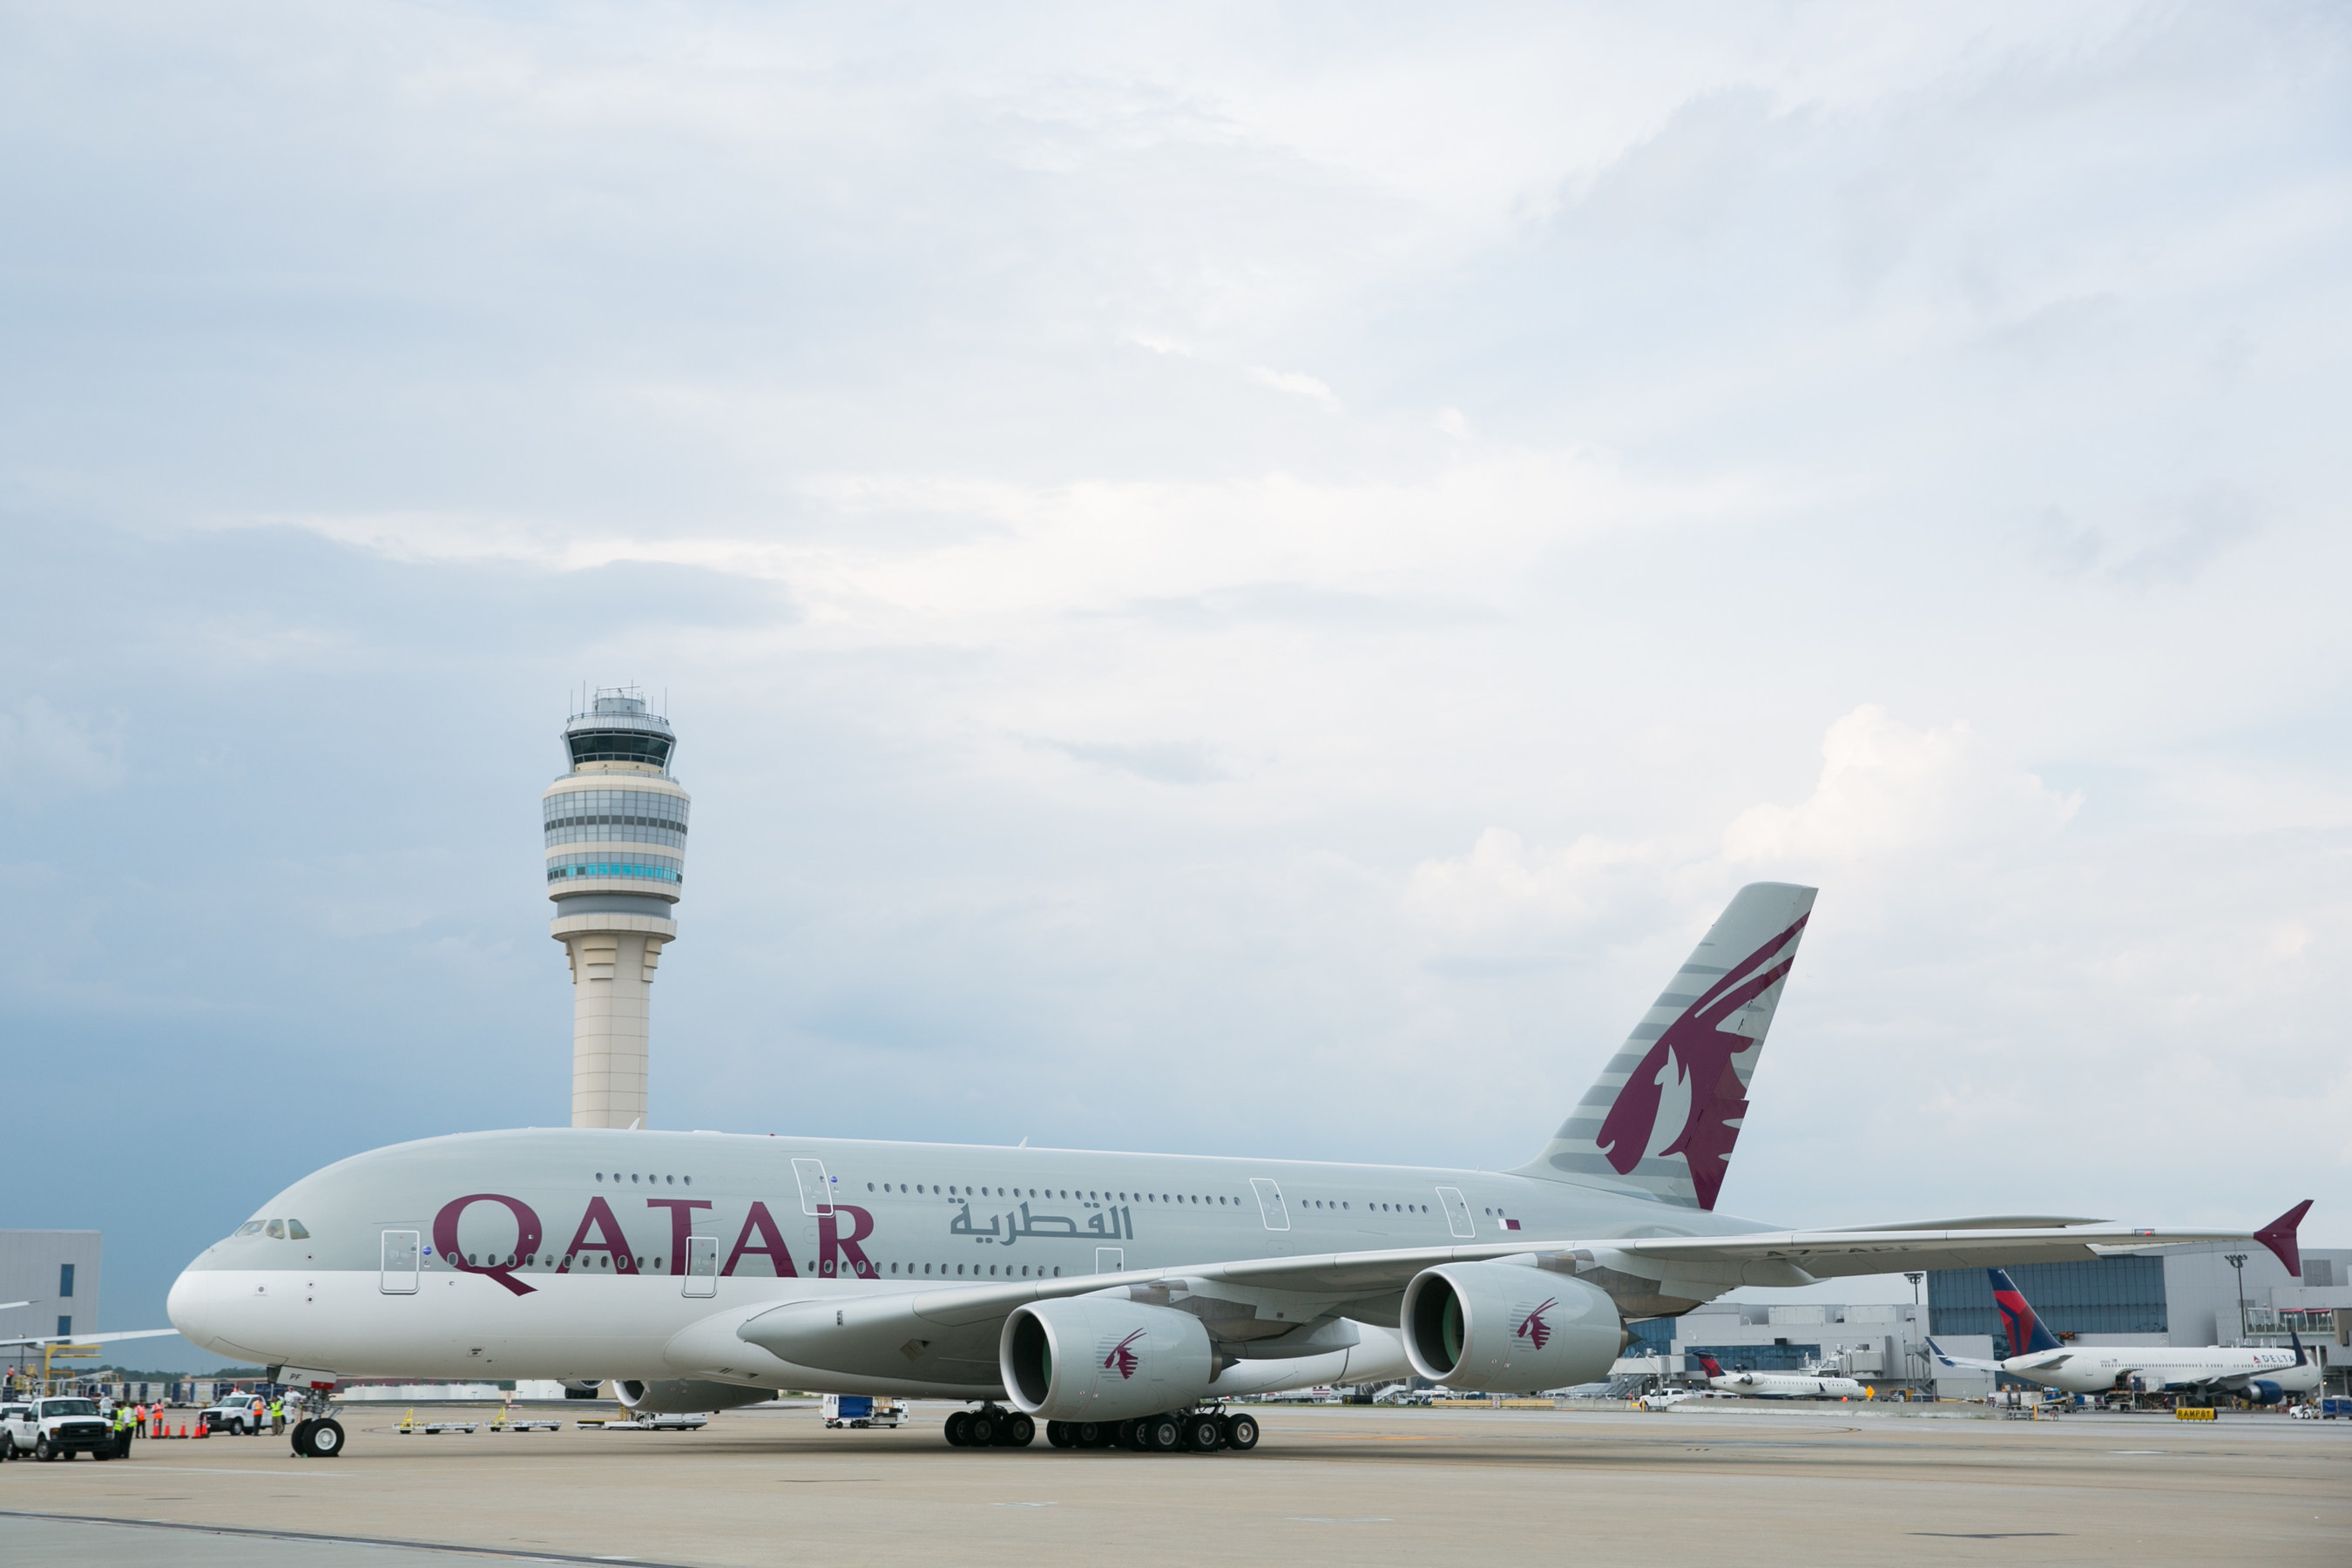 Qatar Airways A380 inaugural flight #756 taxis to pick up new Atlanta passengers bound for Doha and 41 countries beyond